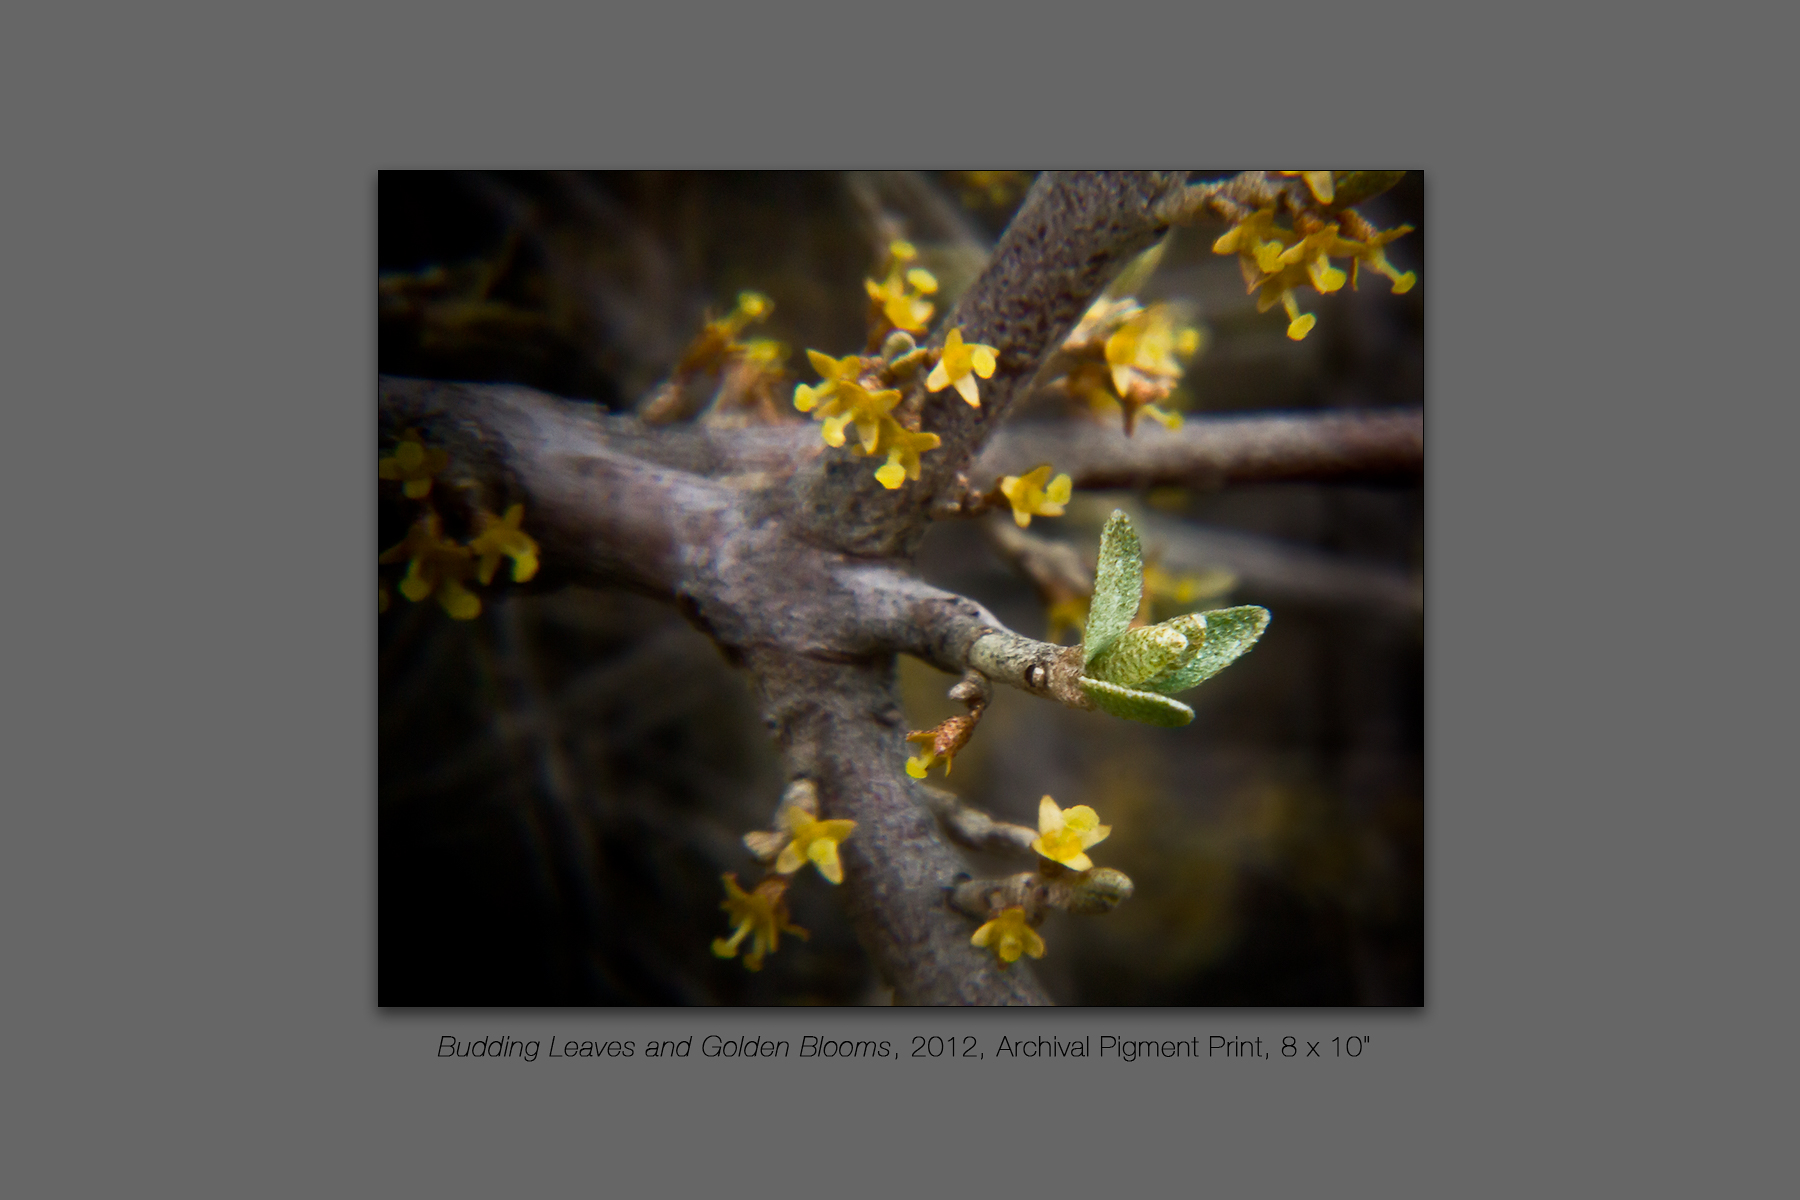 Budding Leaves and Golden Blooms, 2012